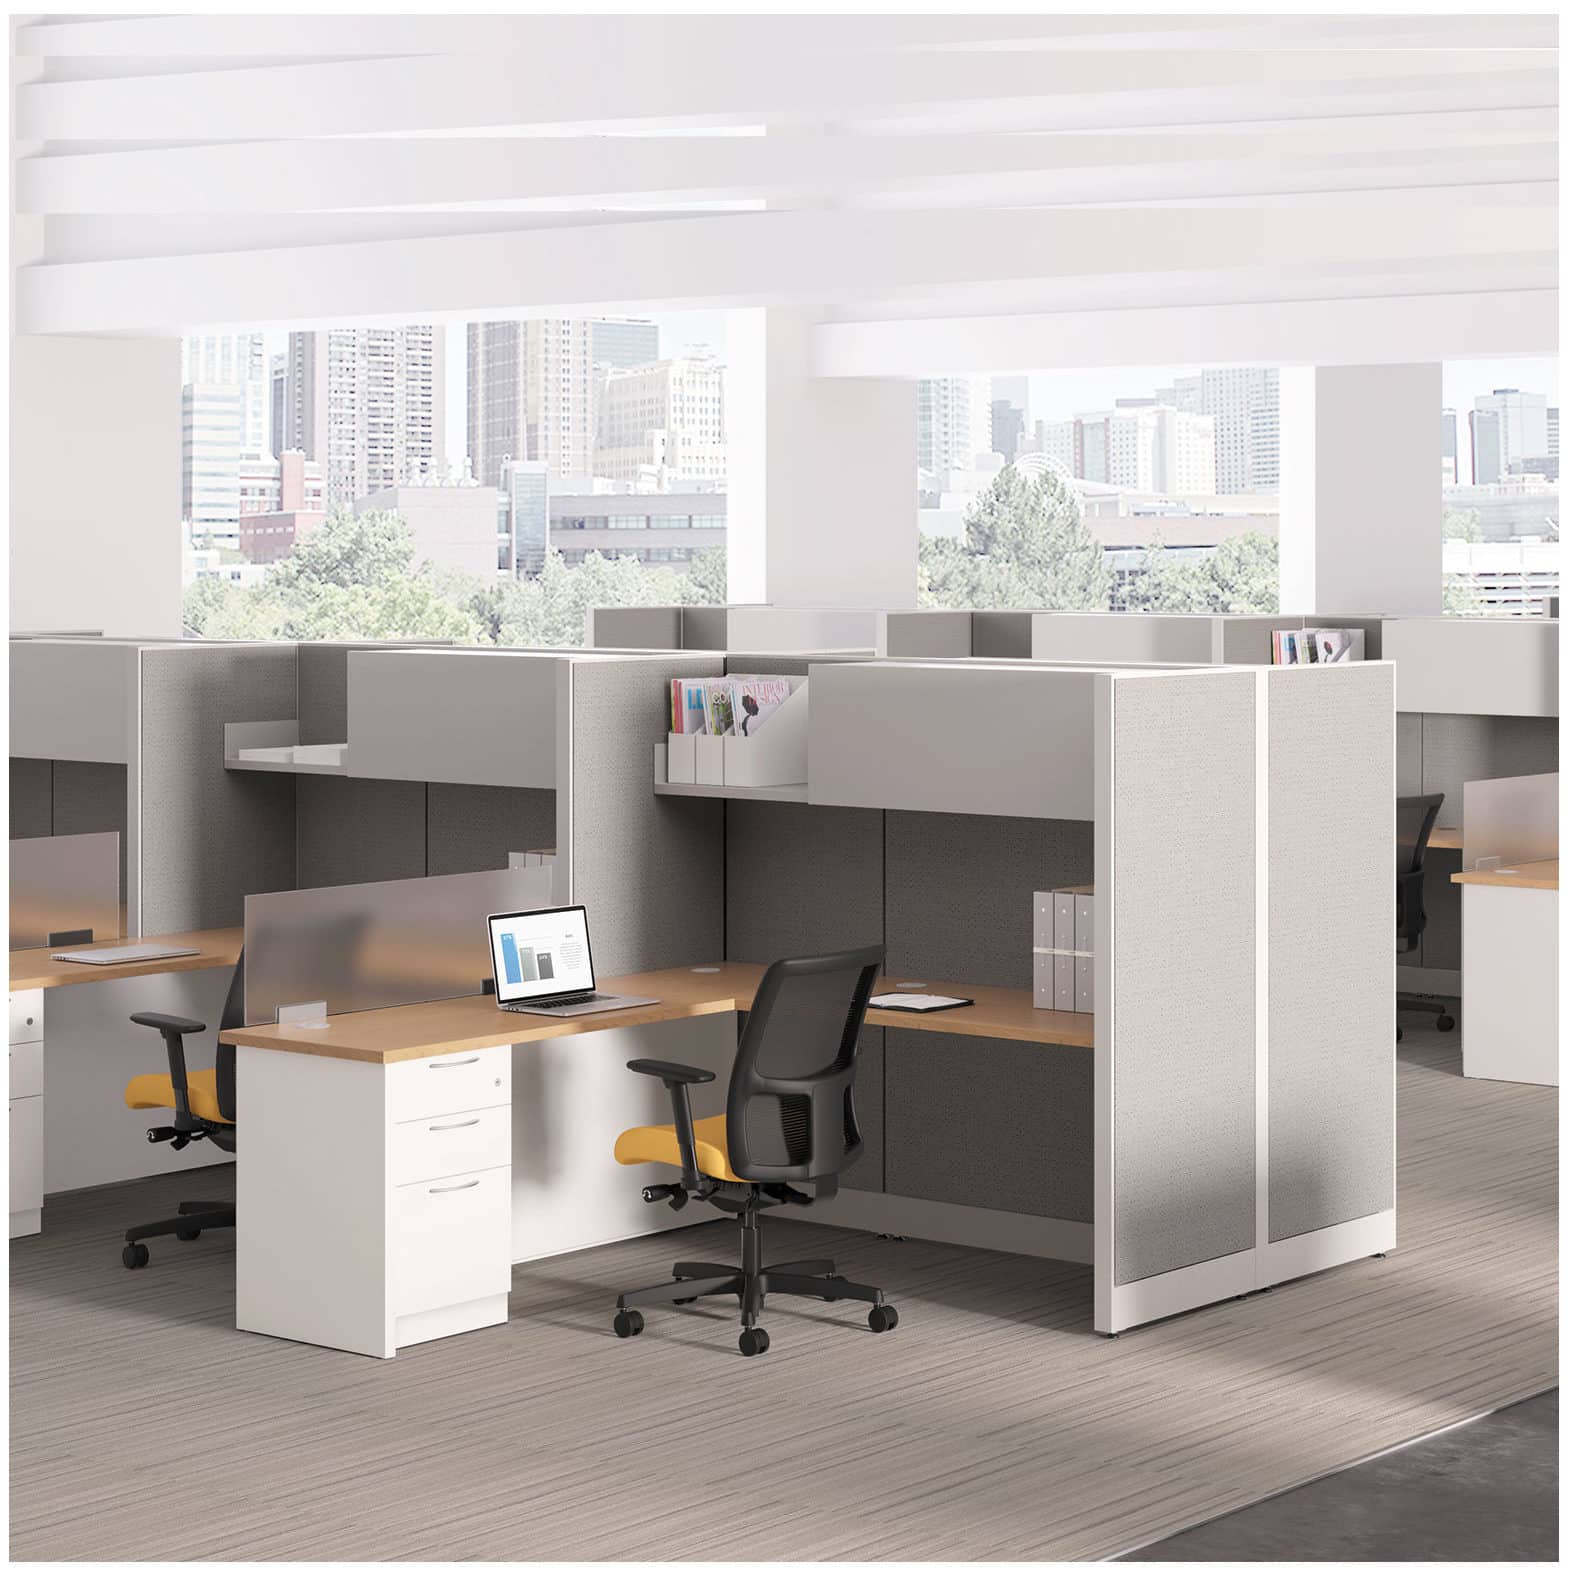 Hon Abode_Contain_Ignition and Flock for workstations office furniture